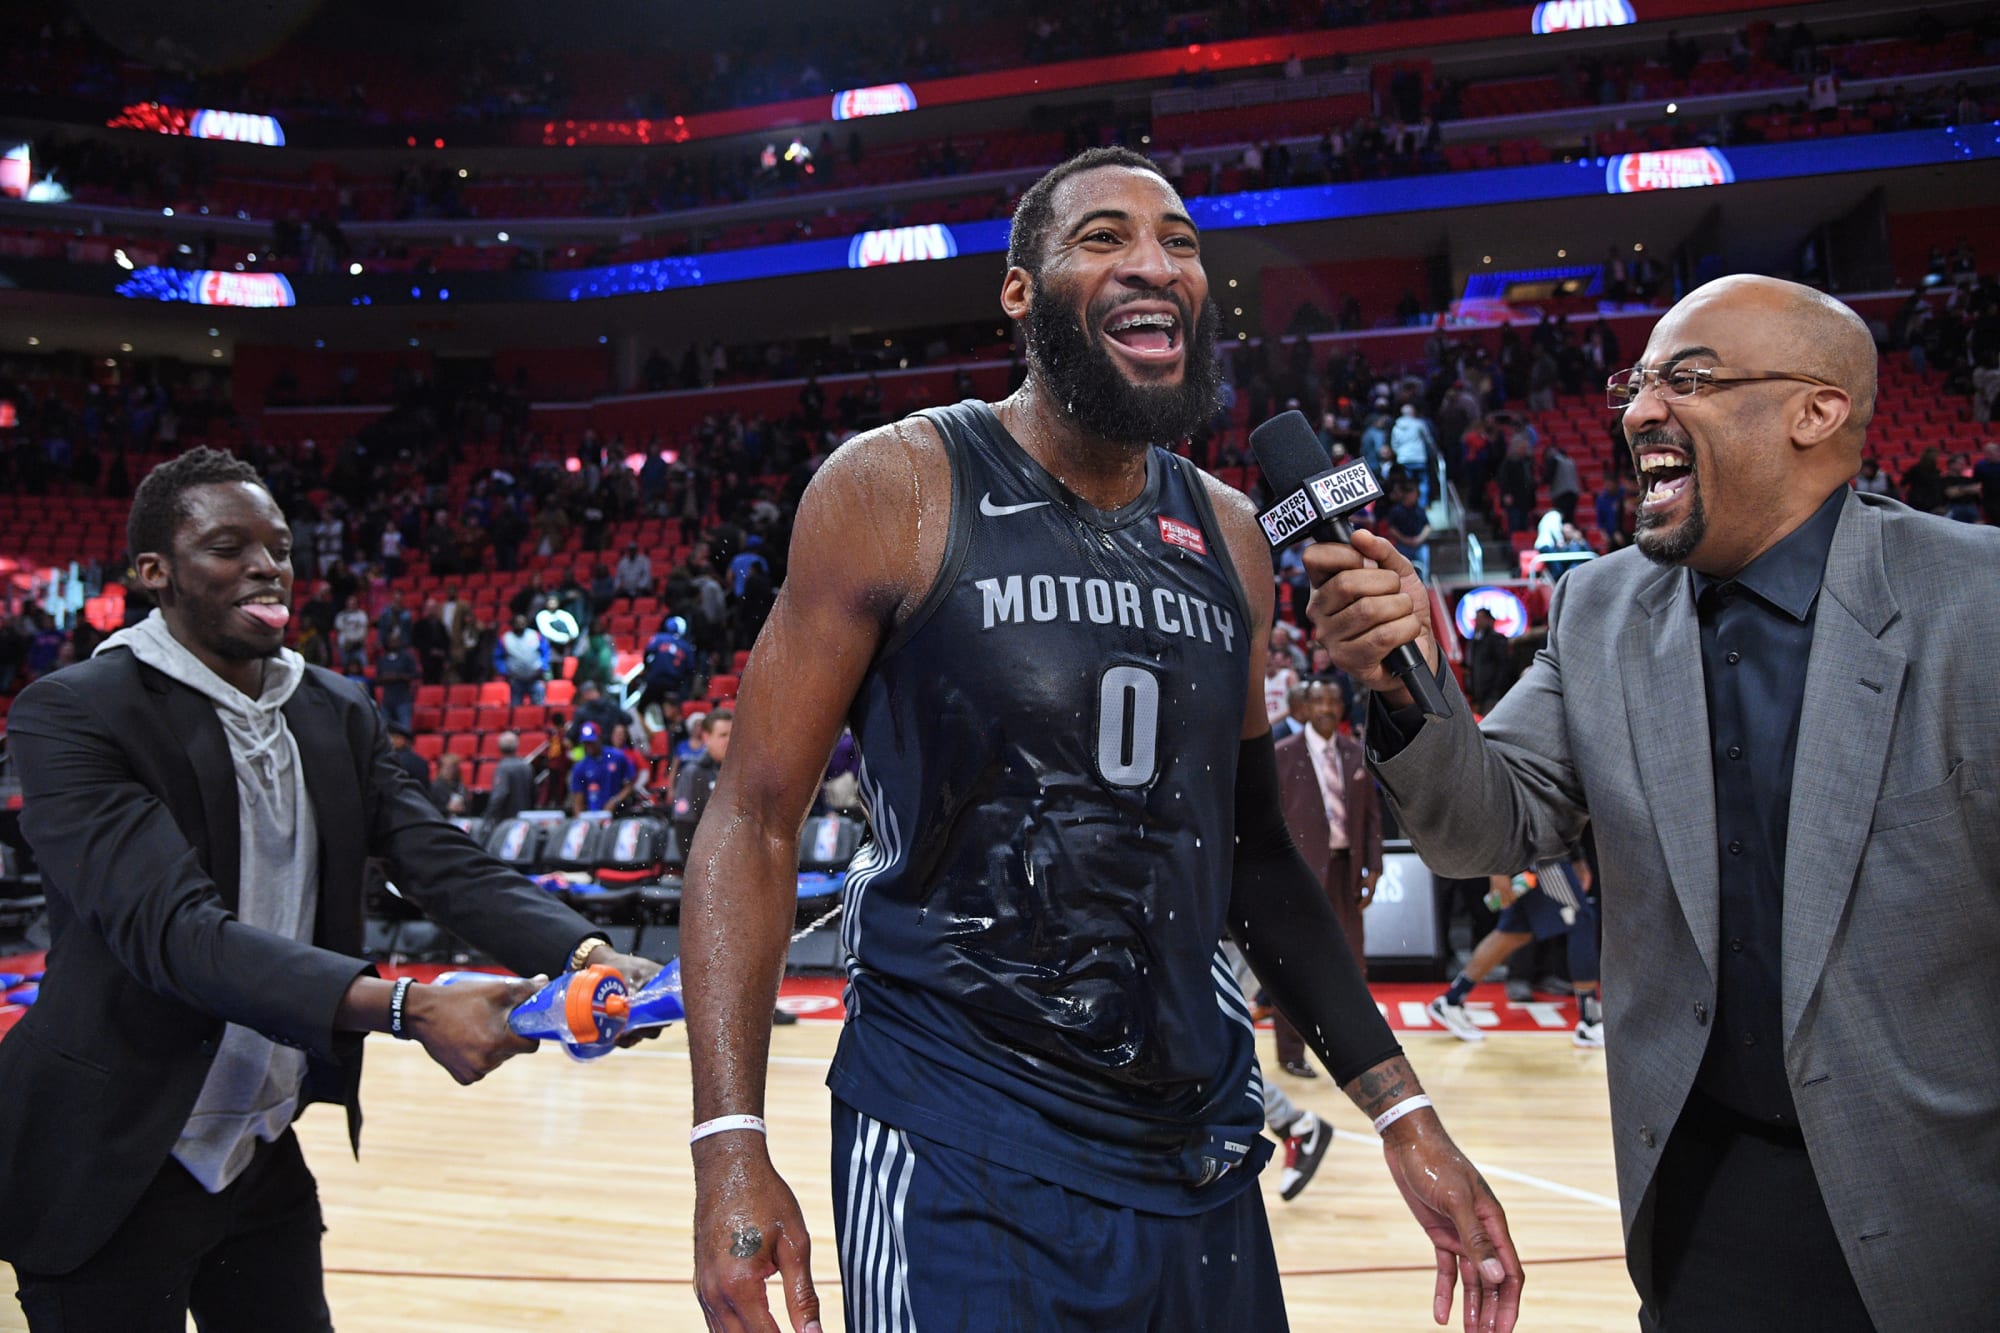 Franchise Milestones Within Reach For Andre Drummond